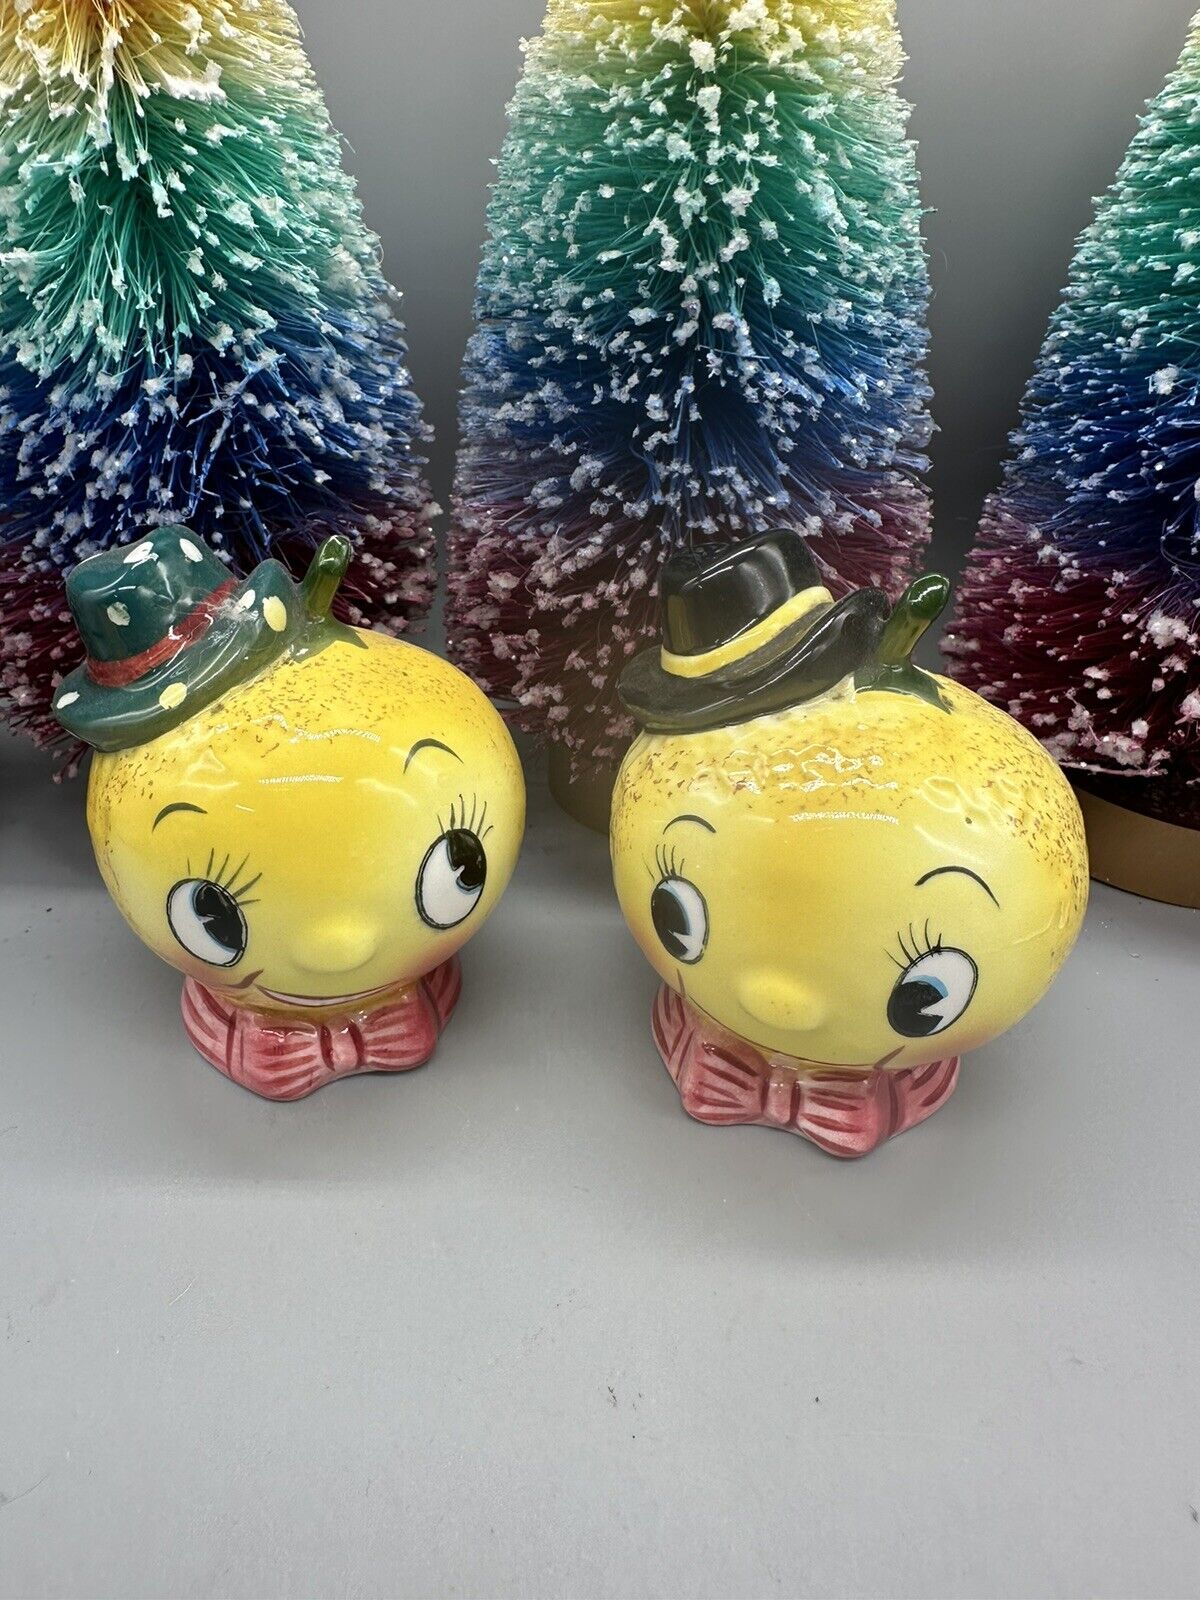 Vintage 1950s PY Anthropomorphic Lemons With Hats Salt and Pepper Shakers Japan